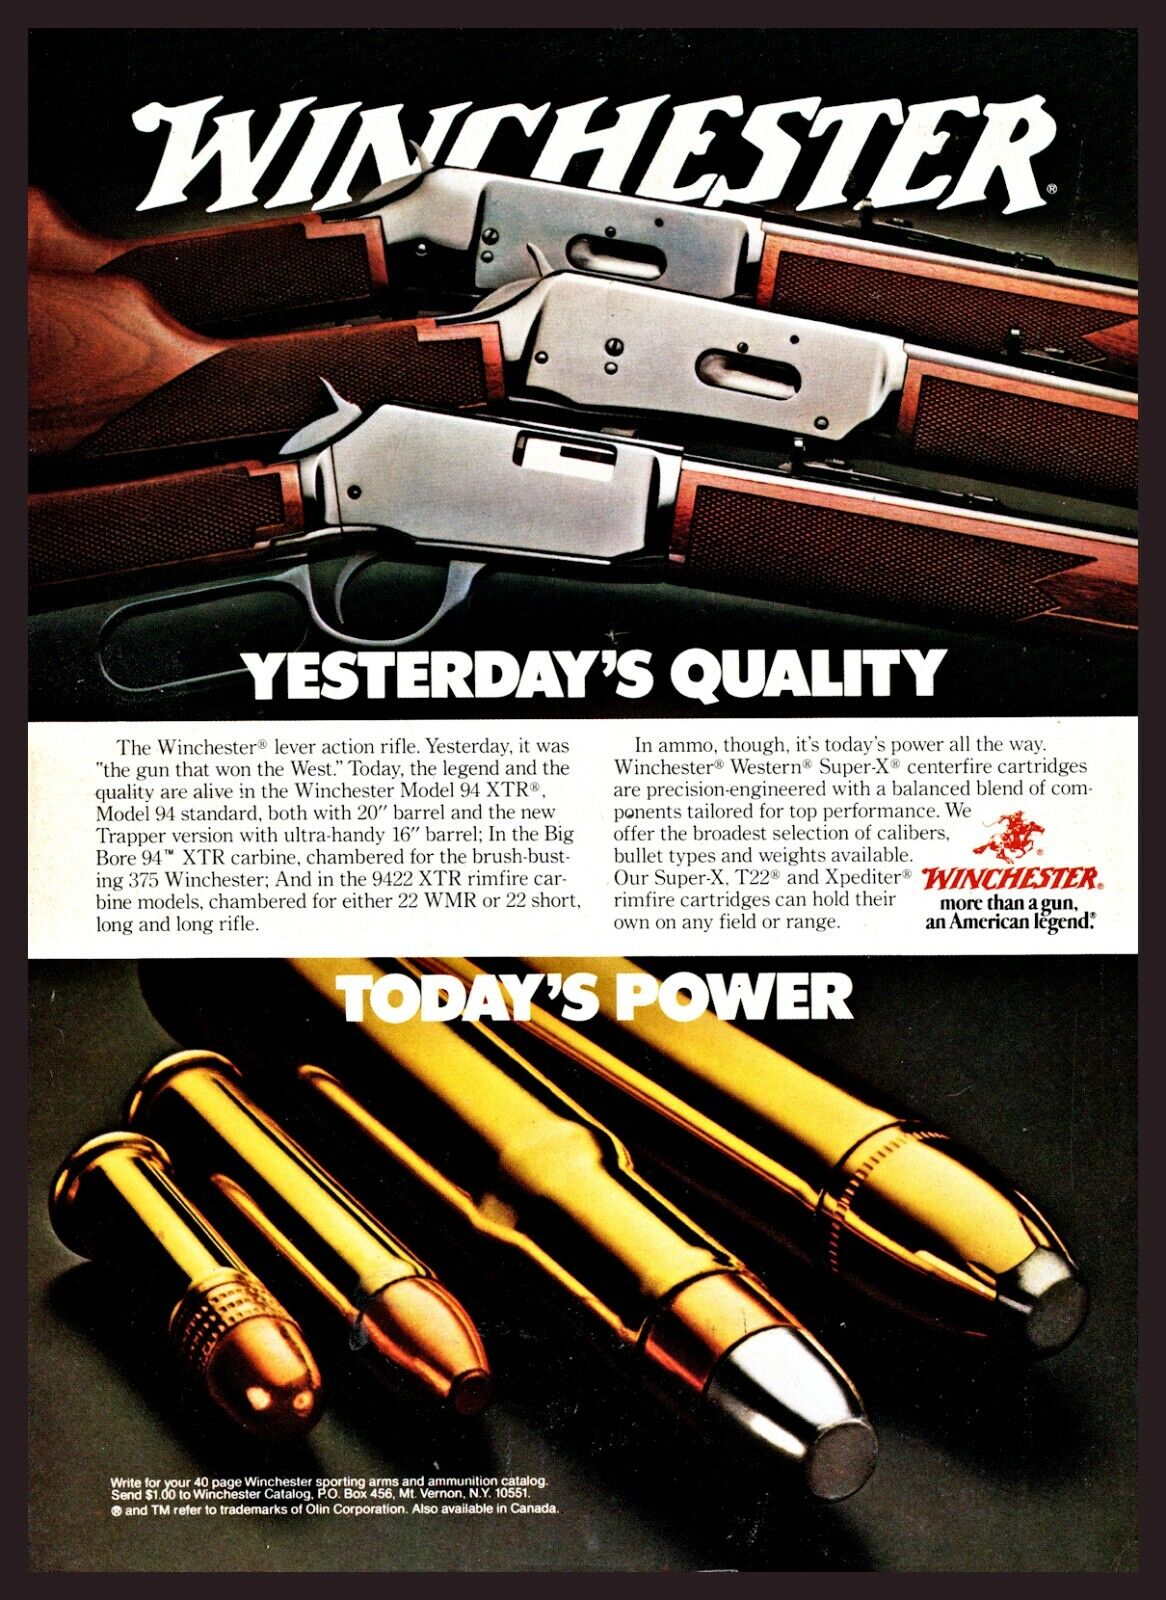 1981 WINCHESTER 94 XTR Standard & Trapper Lever Action Rifle and Ammunition AD